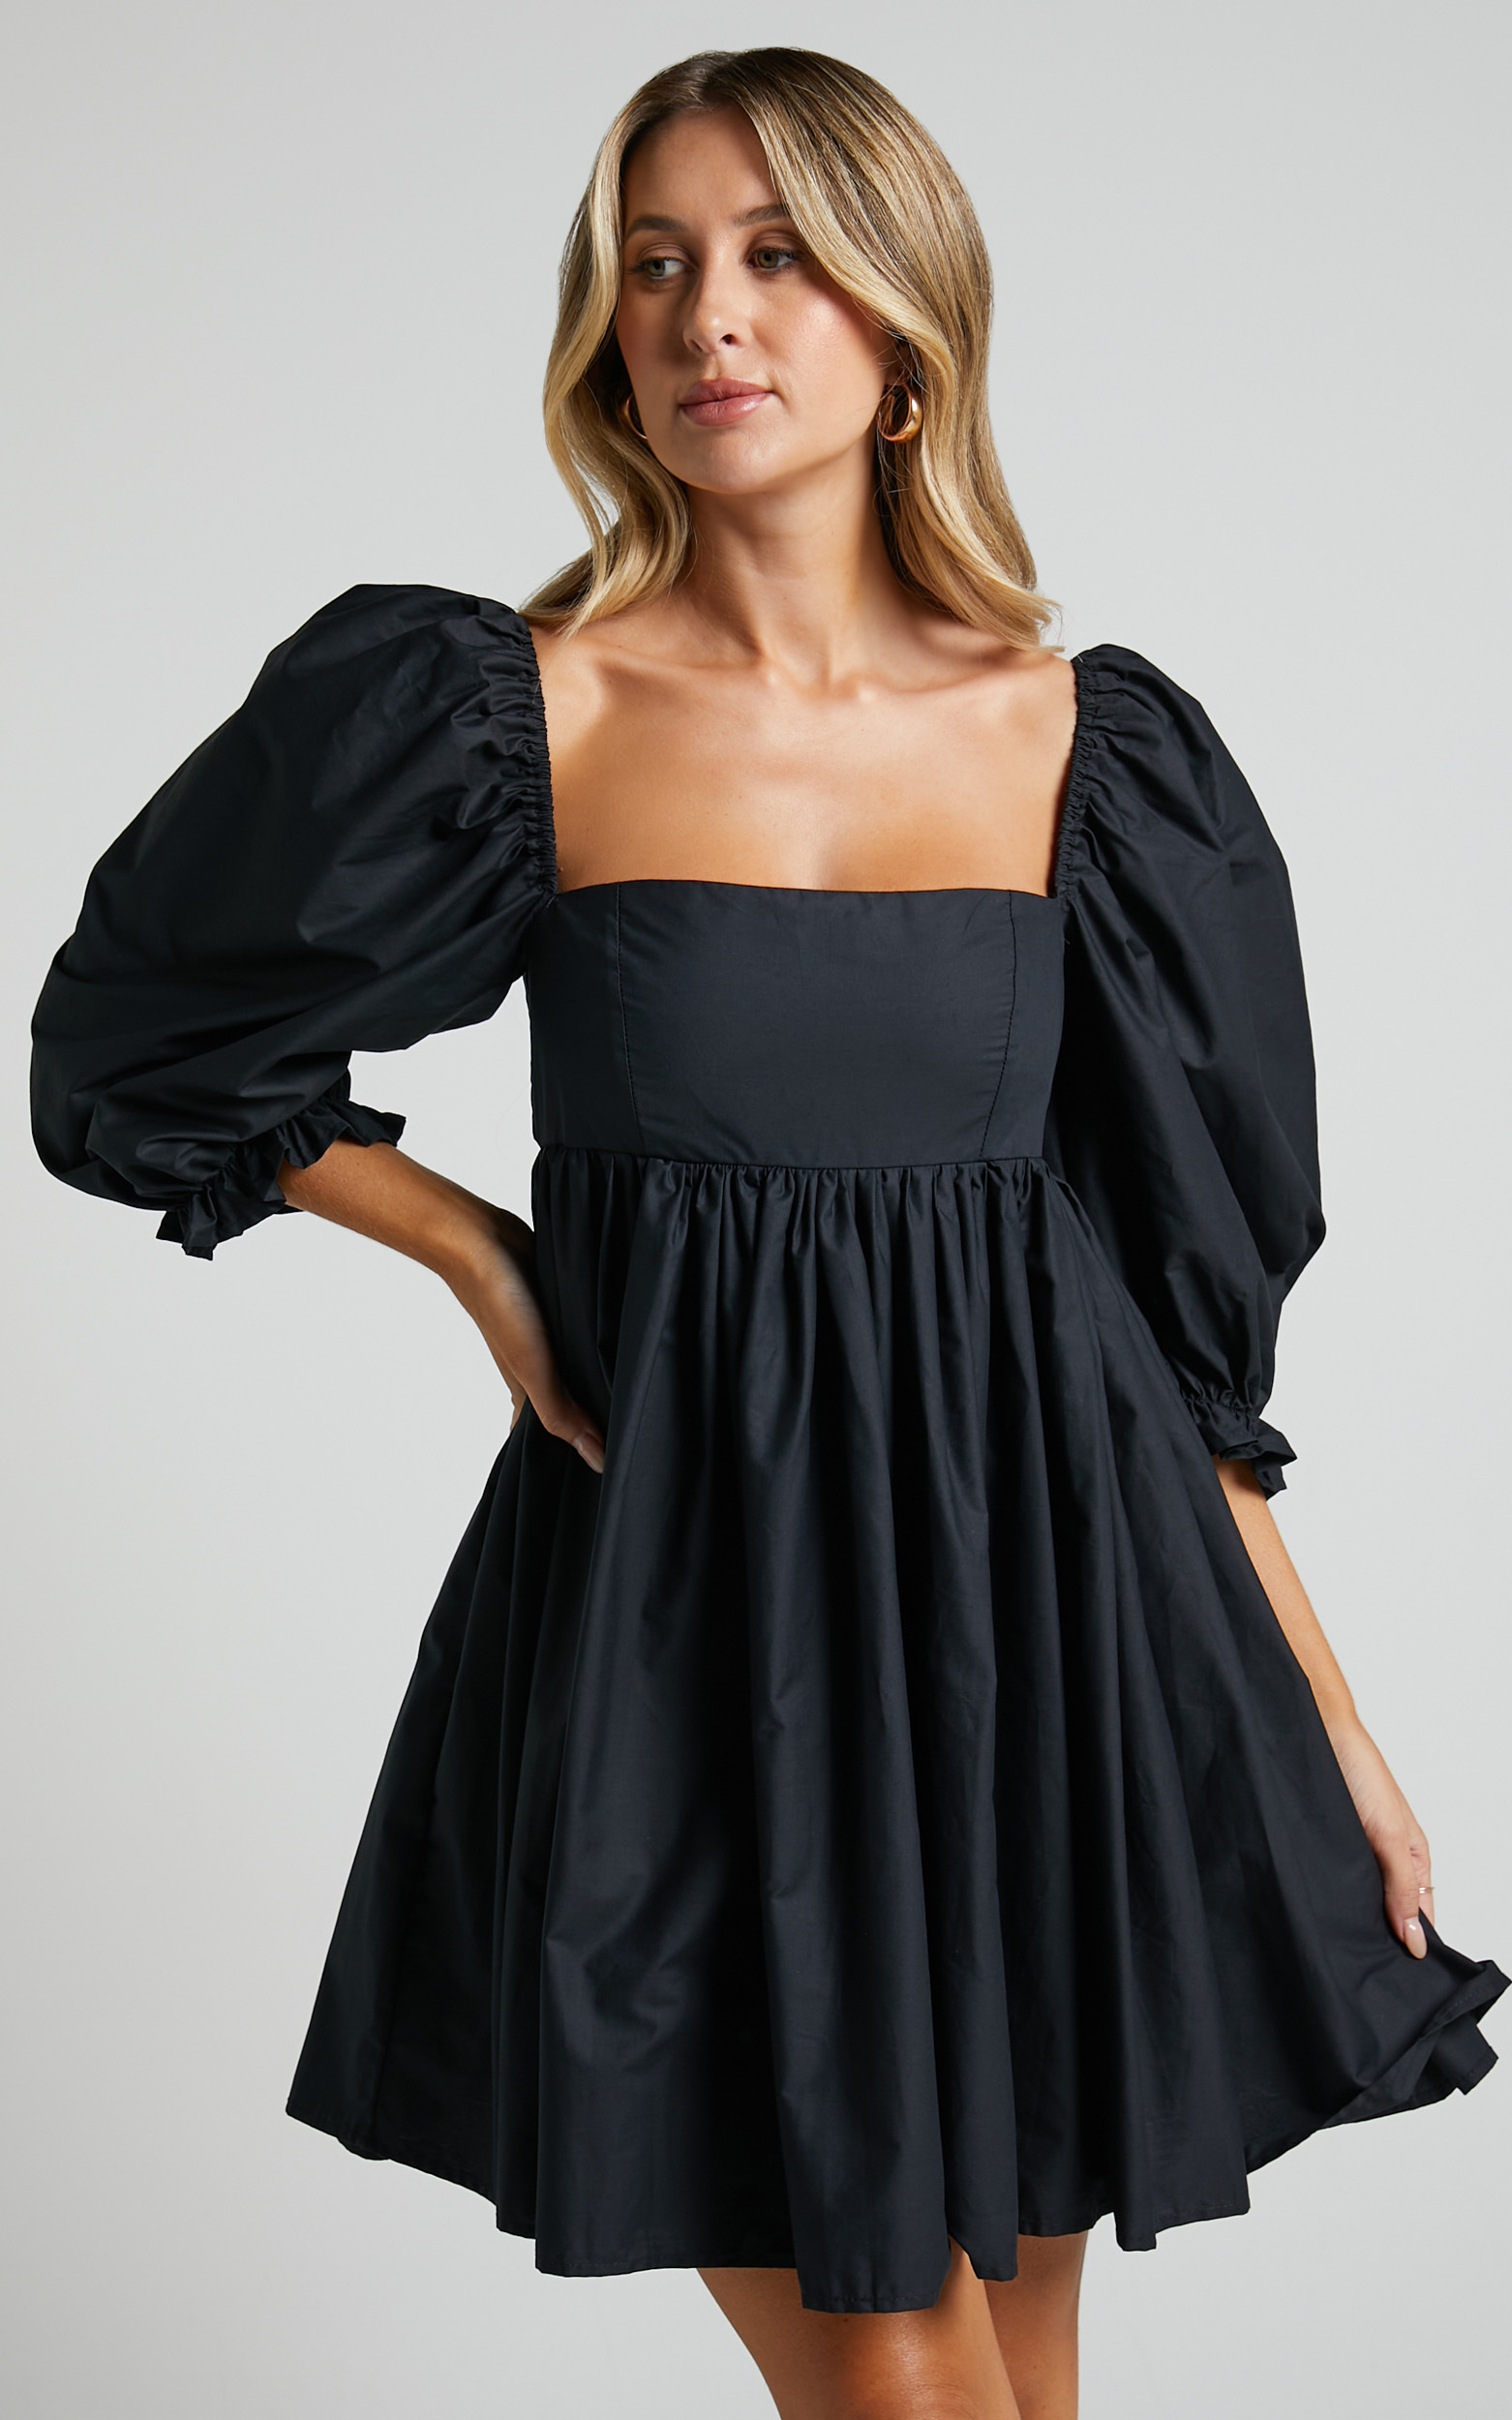 Denise Square Neck 3/4 Puff Sleeve Babydoll Mini Dress in Black - 08, BLK1, hi-res image number null